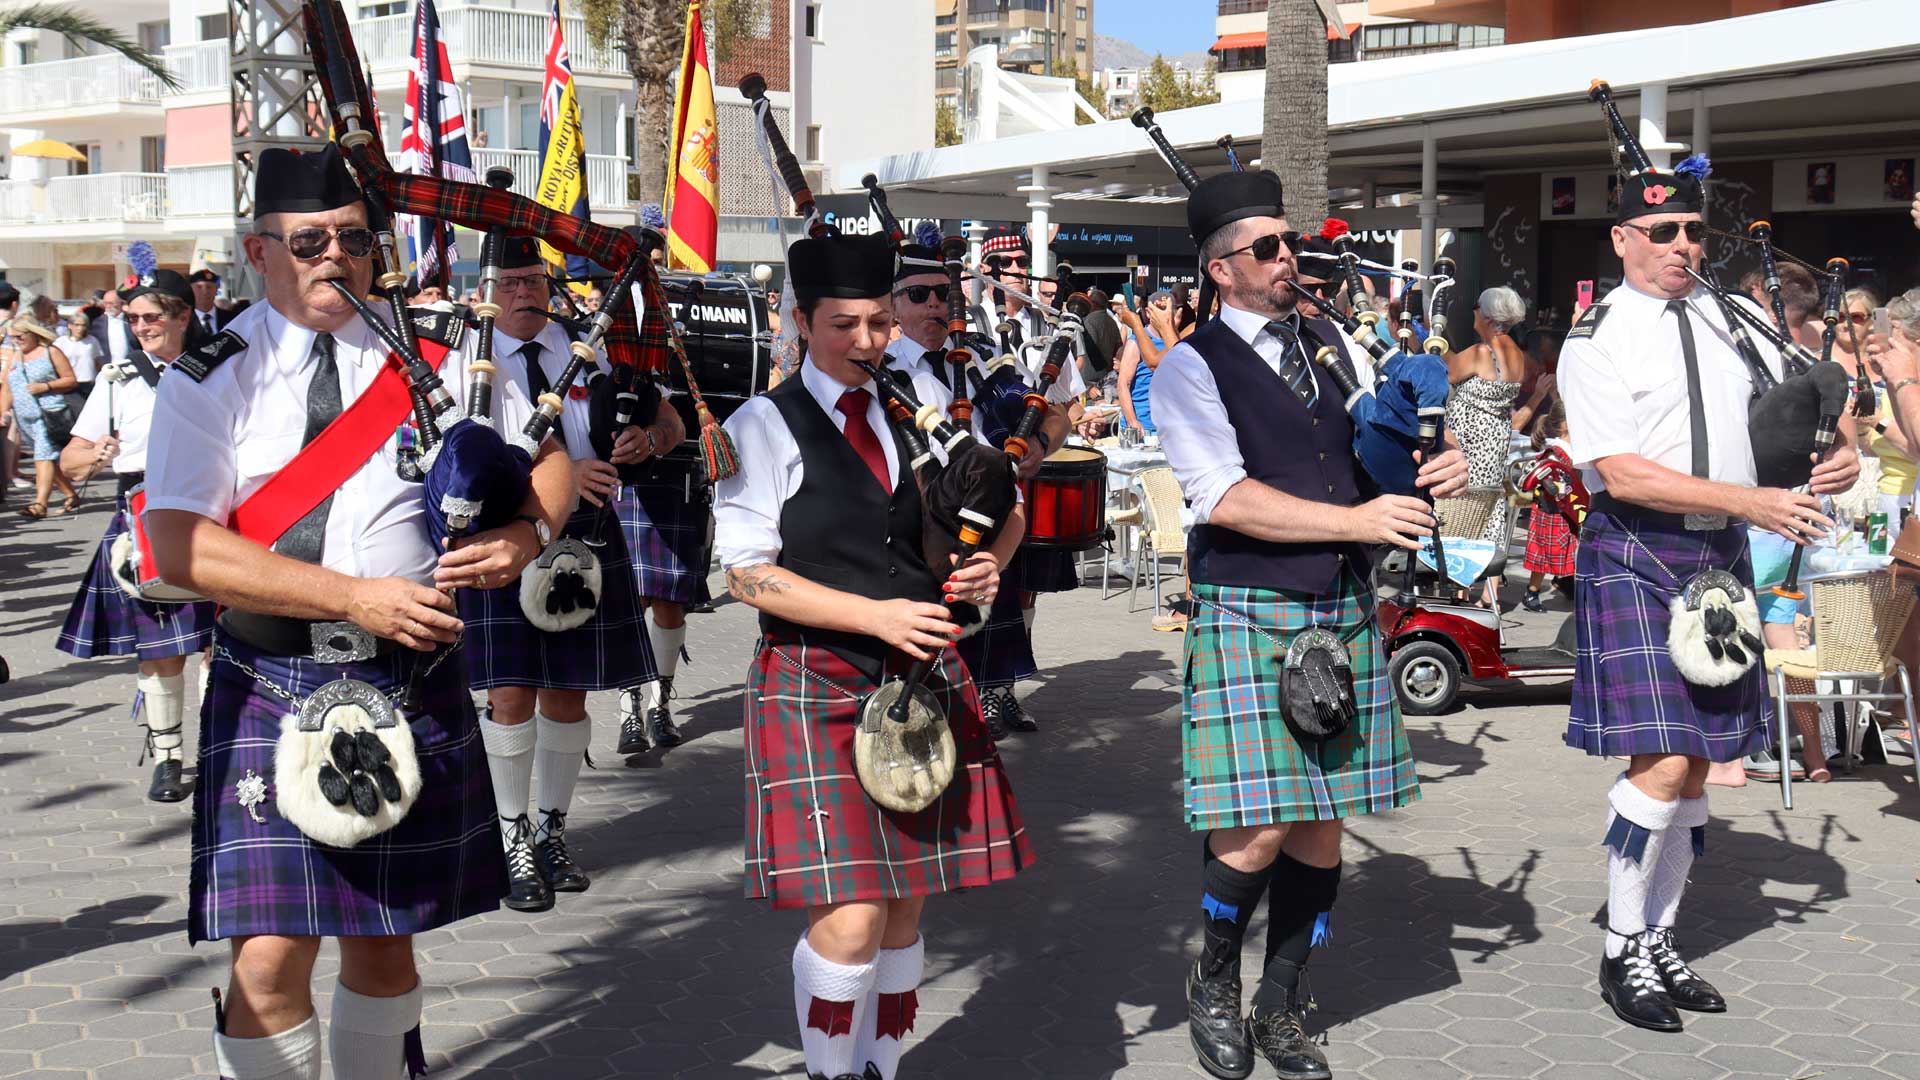 Benidorm Launches Regional Poppy Appeal With Royal British Legion Parade On Spain's Costa Blanca